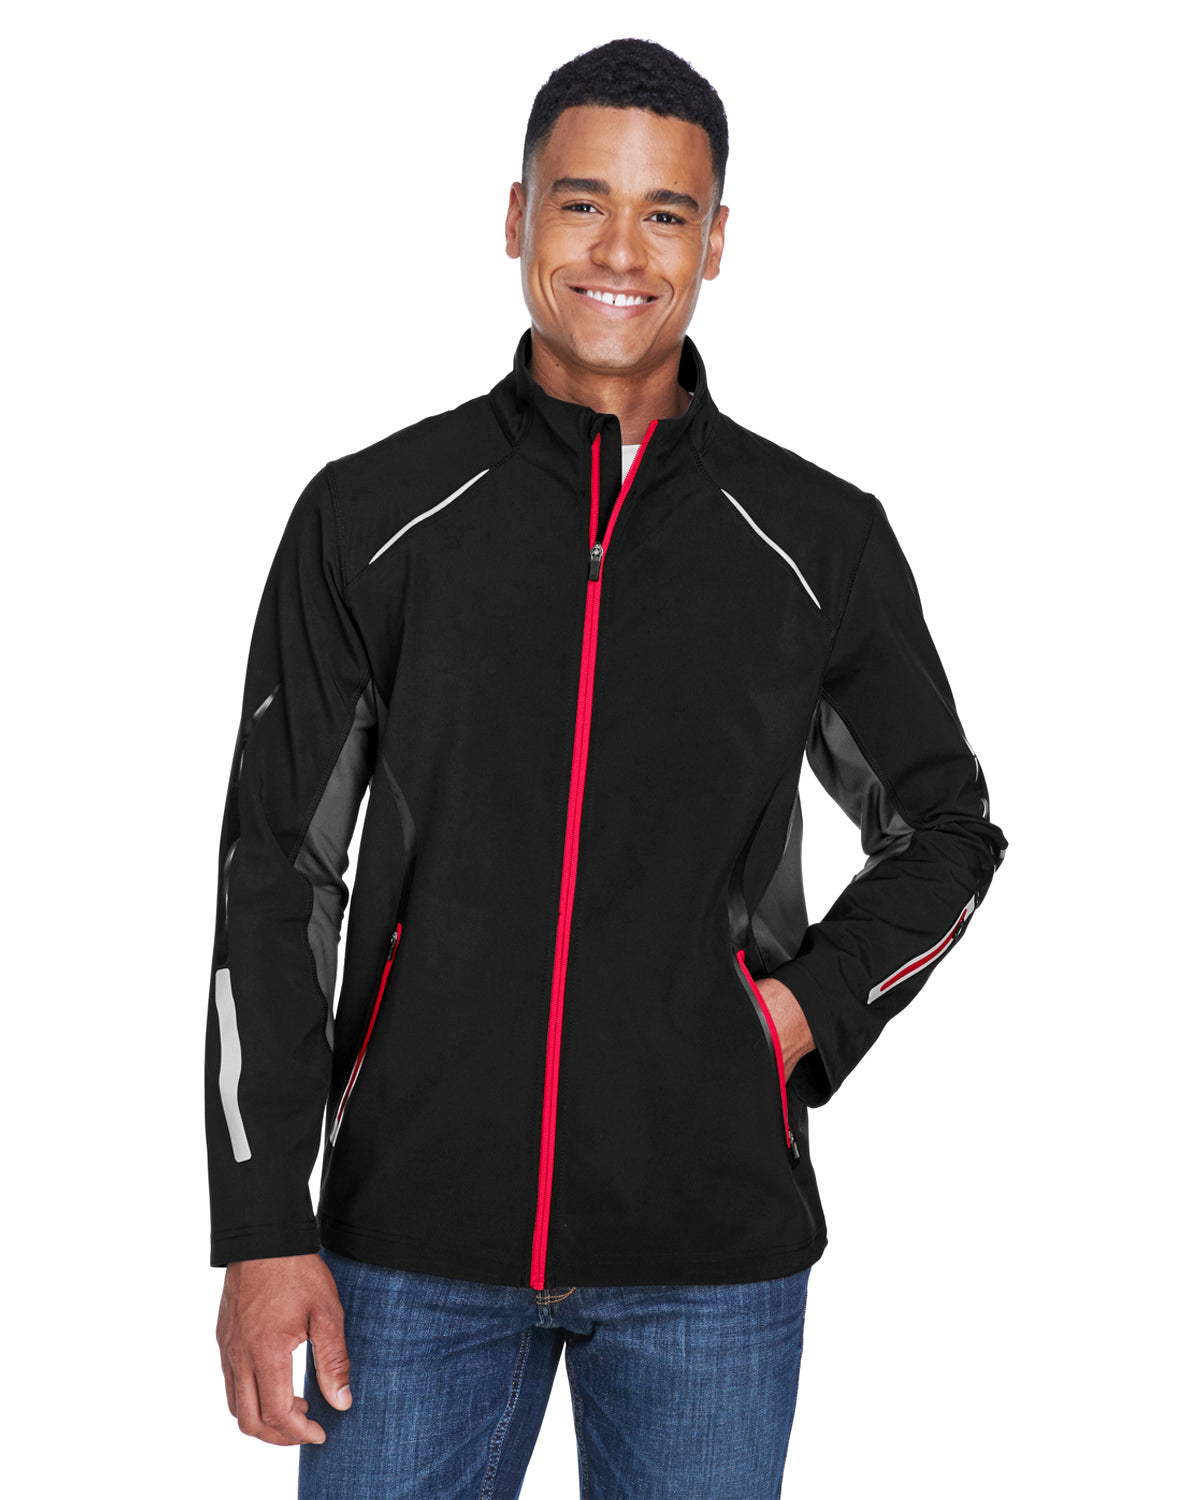 NORTH END MEN'S PURSUIT THREE LAYER SOFT SHELL JACKET